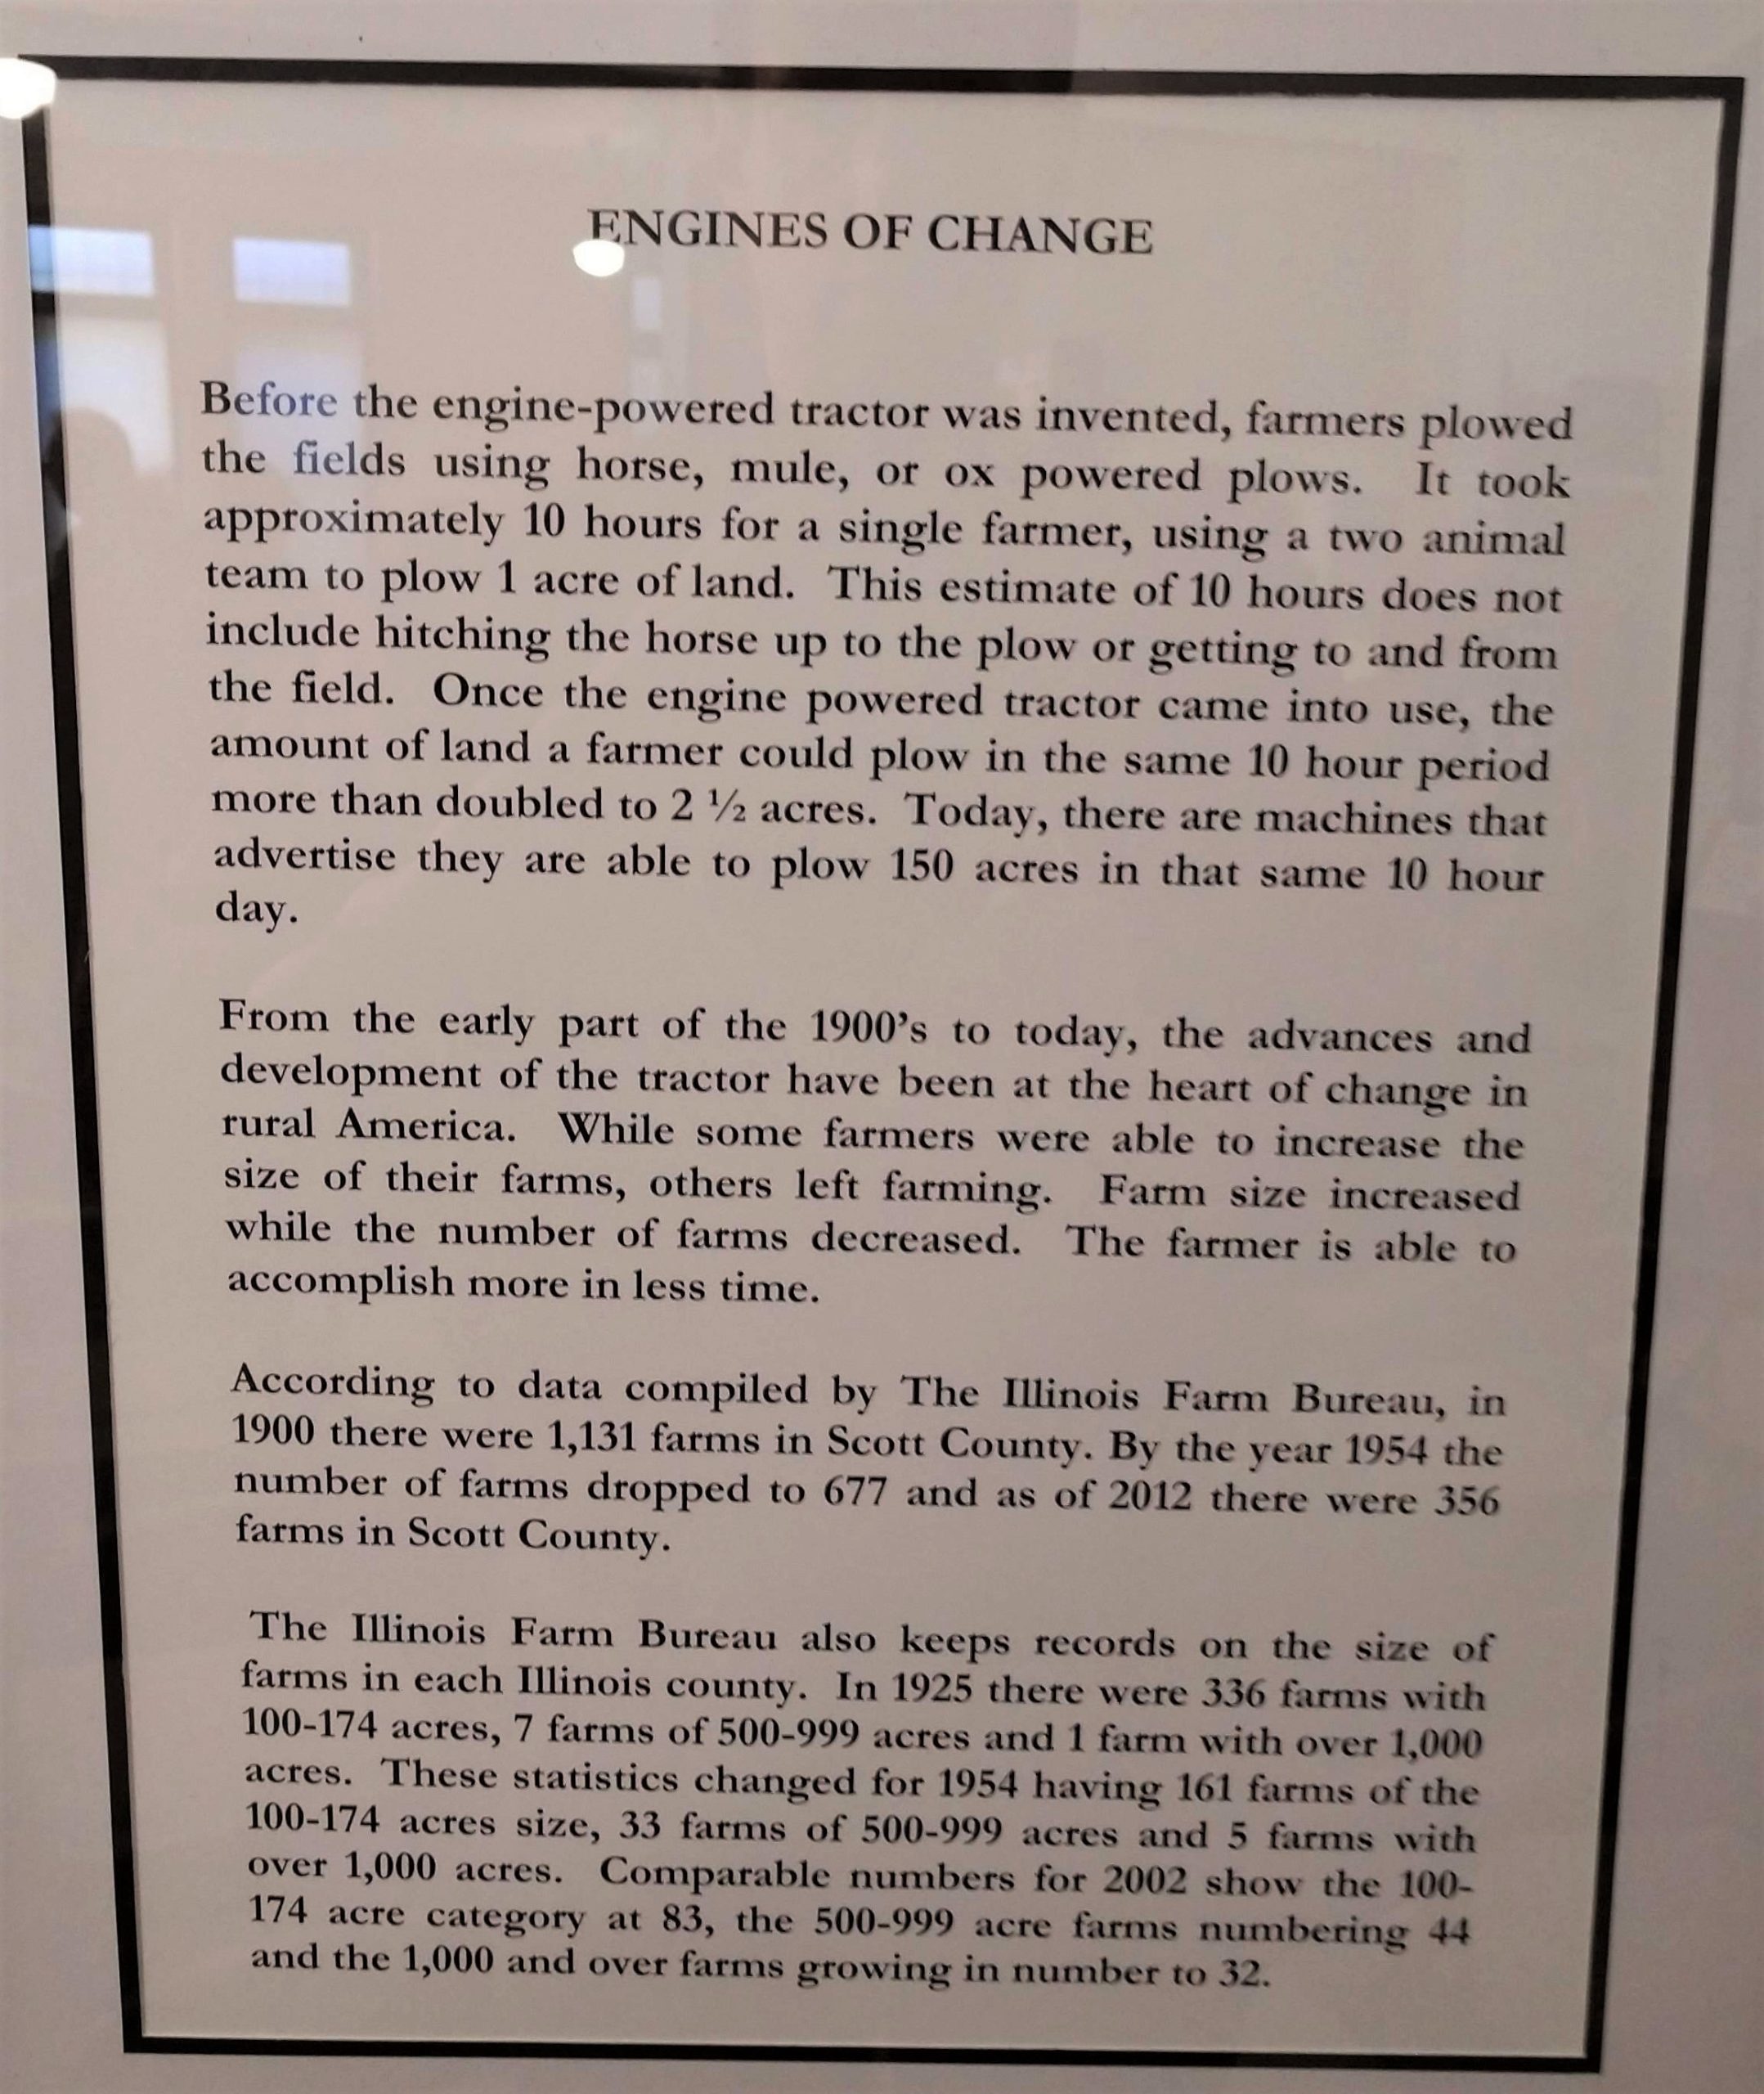 Photograph of text from the Old School Museum's companion exhibition describing the impact of gasoline-powered tractors.